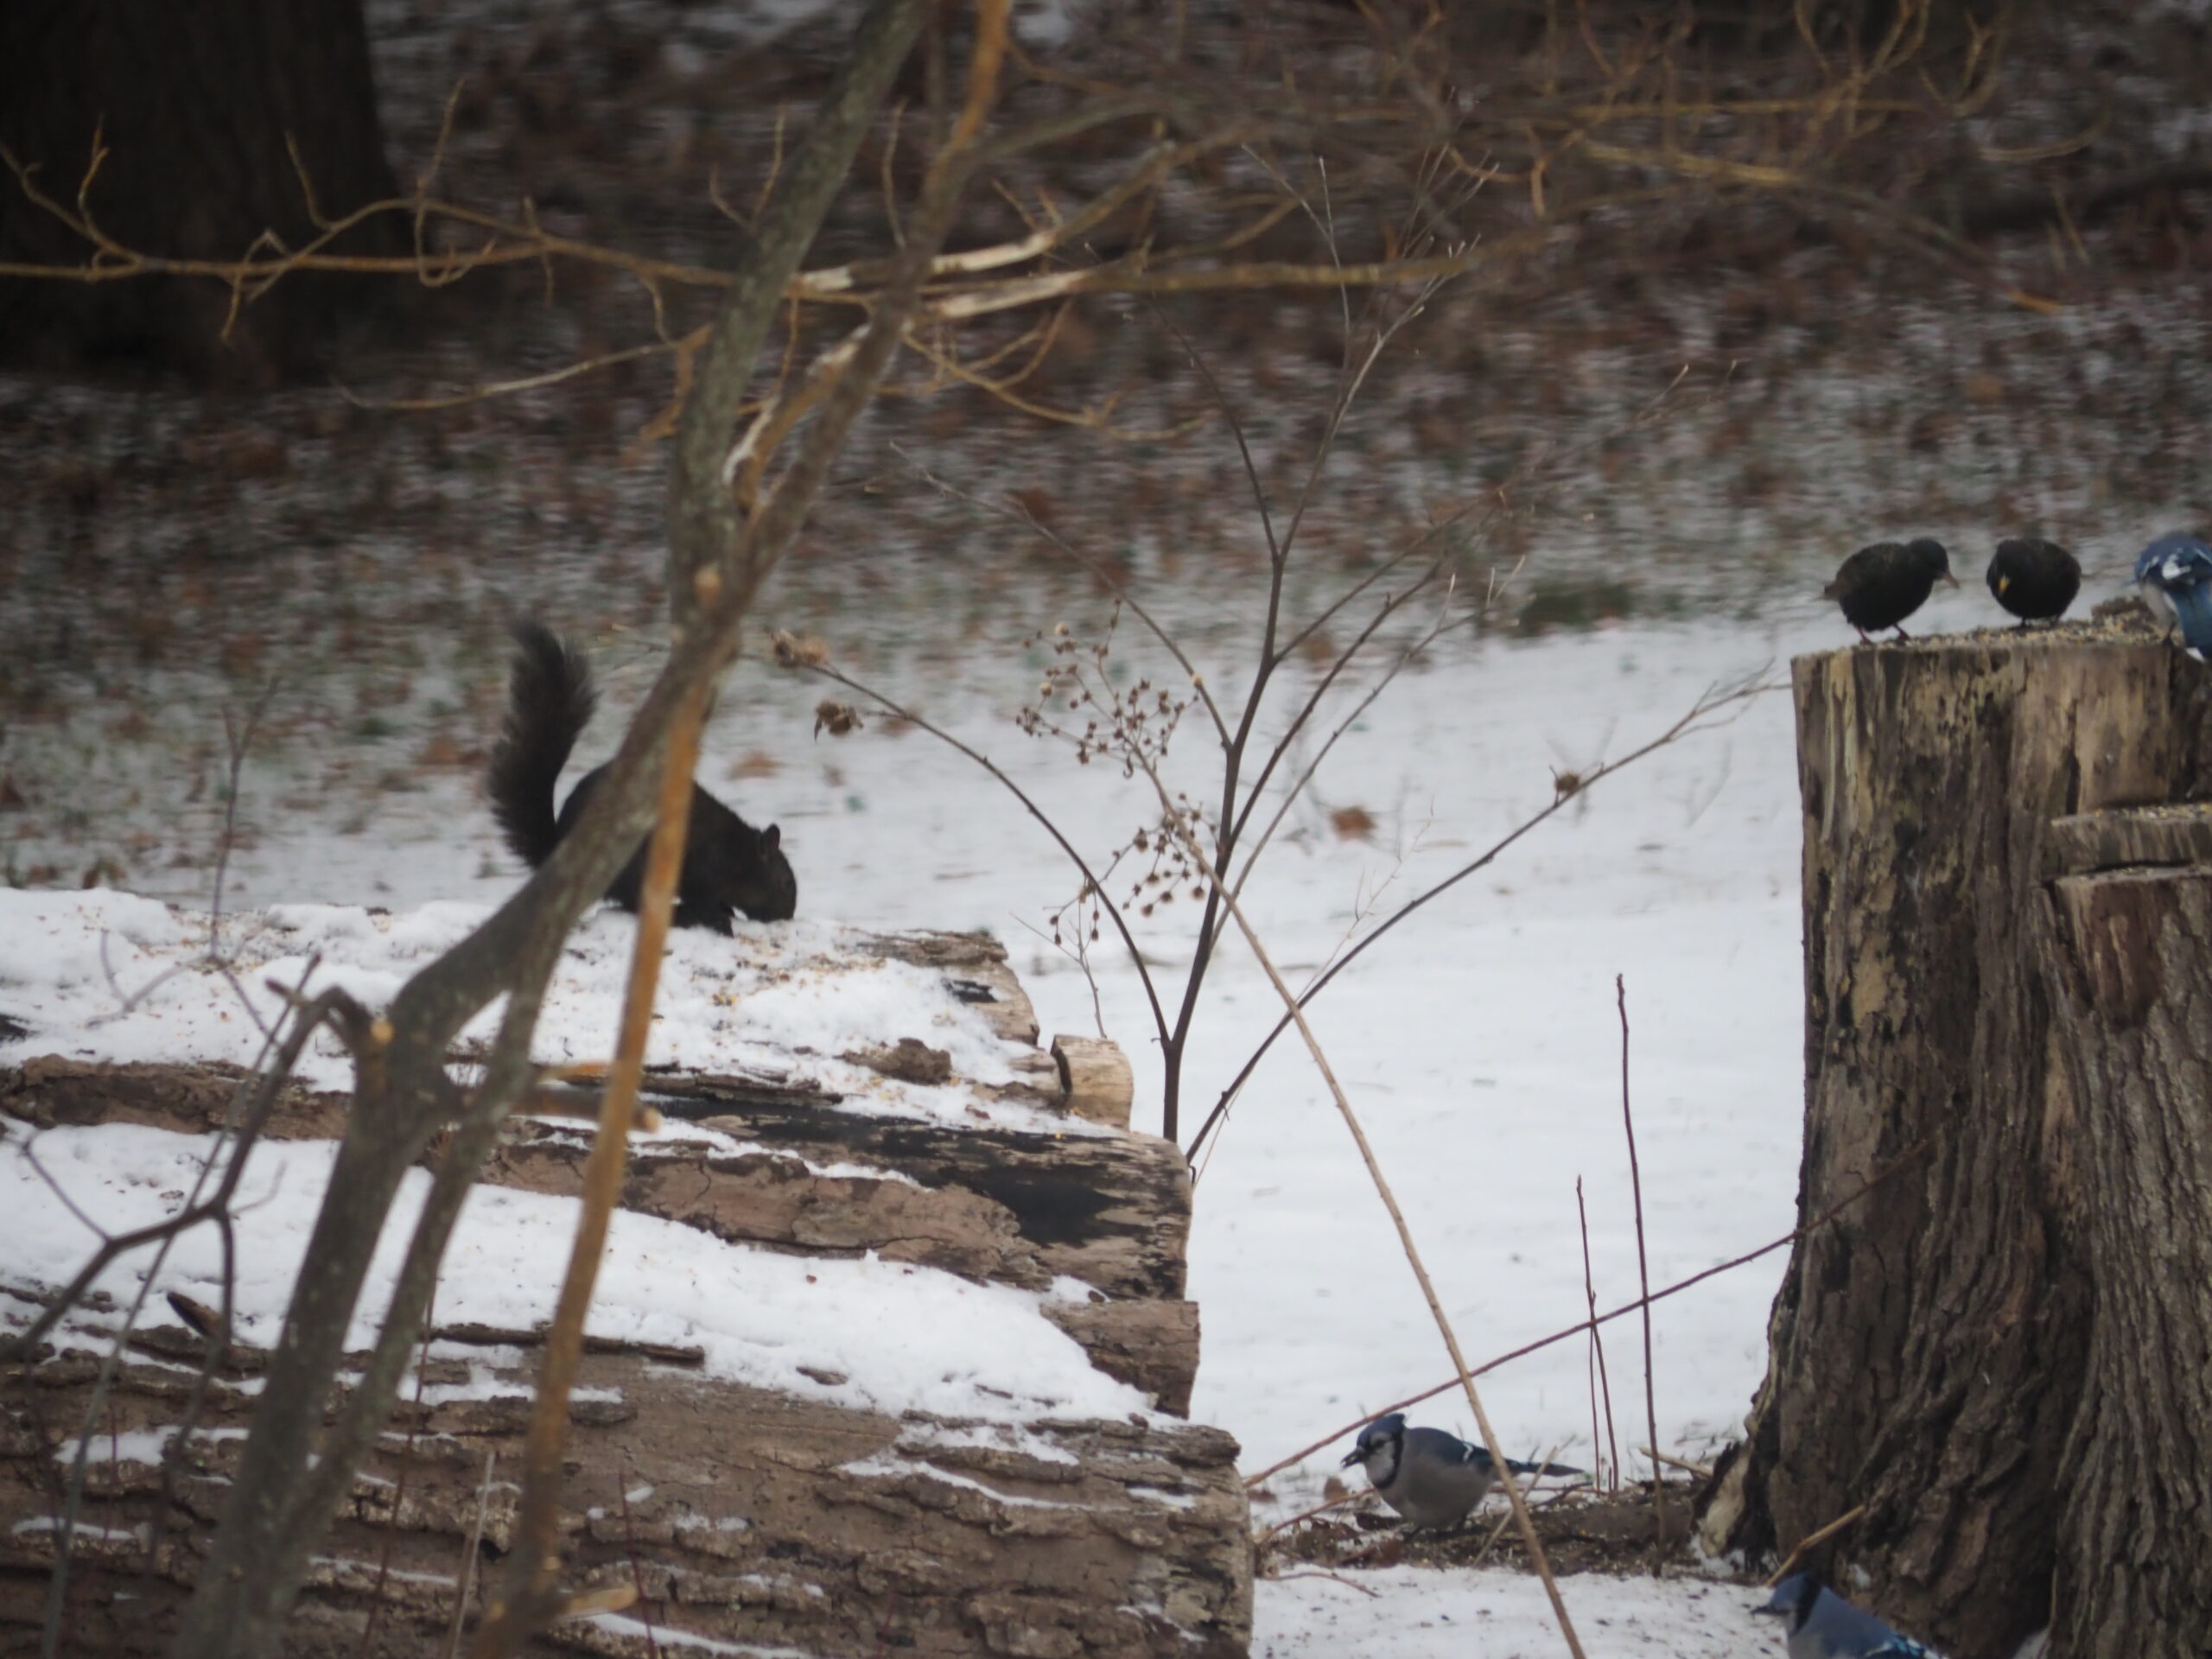 A black squirrel hunts for unshelled peanuts on the left while jays and starlings feed on and around the stump. ANDREW MESSINGER